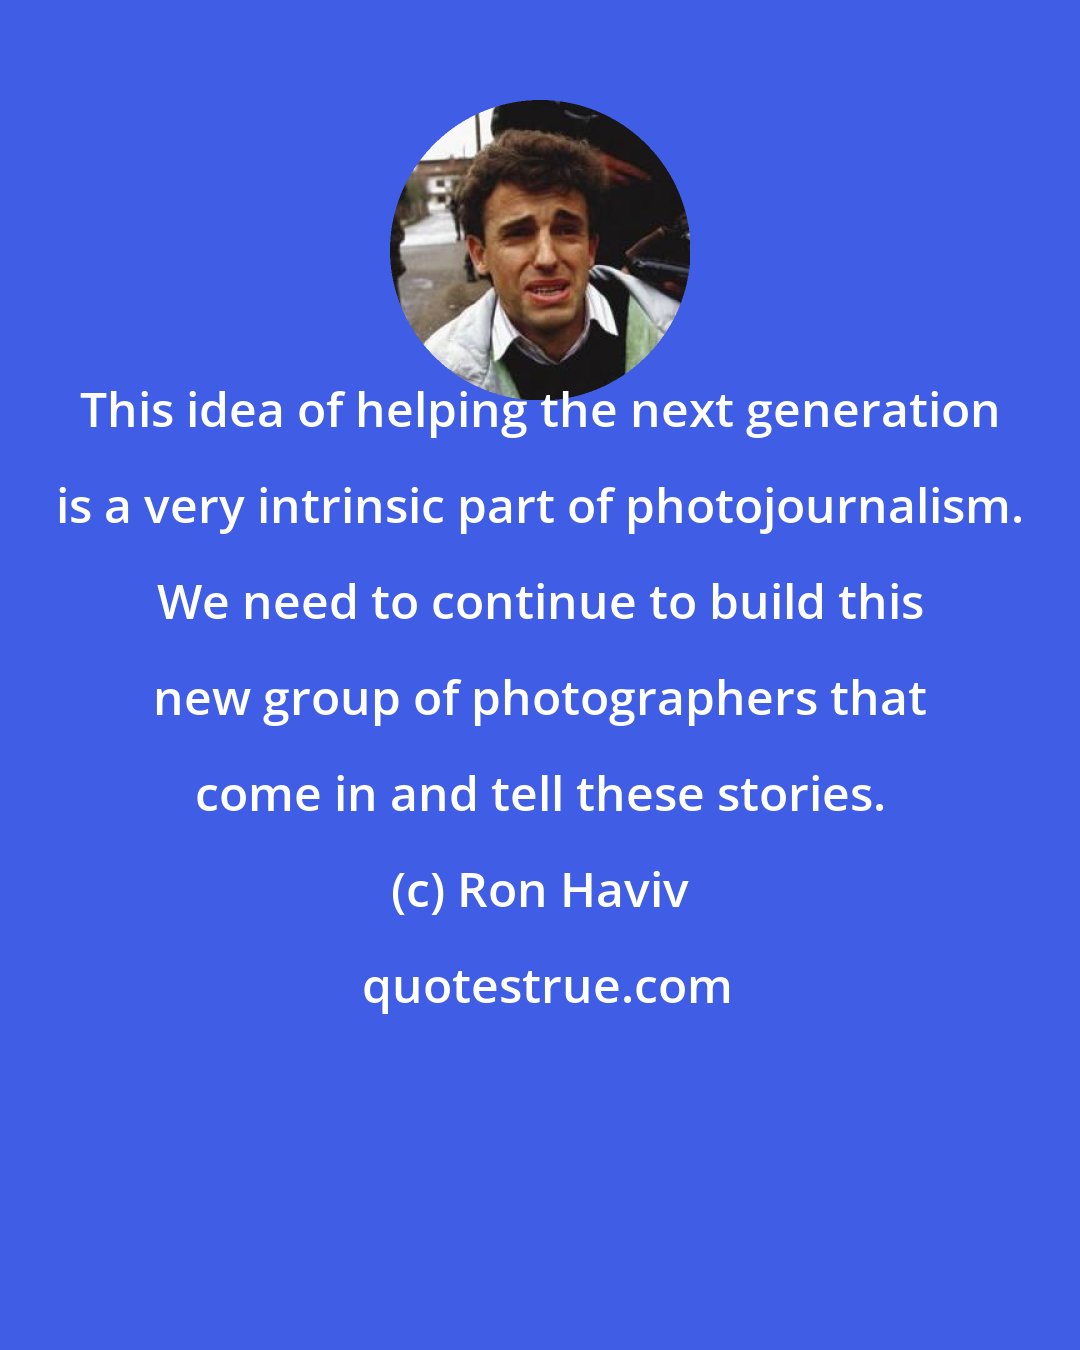 Ron Haviv: This idea of helping the next generation is a very intrinsic part of photojournalism. We need to continue to build this new group of photographers that come in and tell these stories.